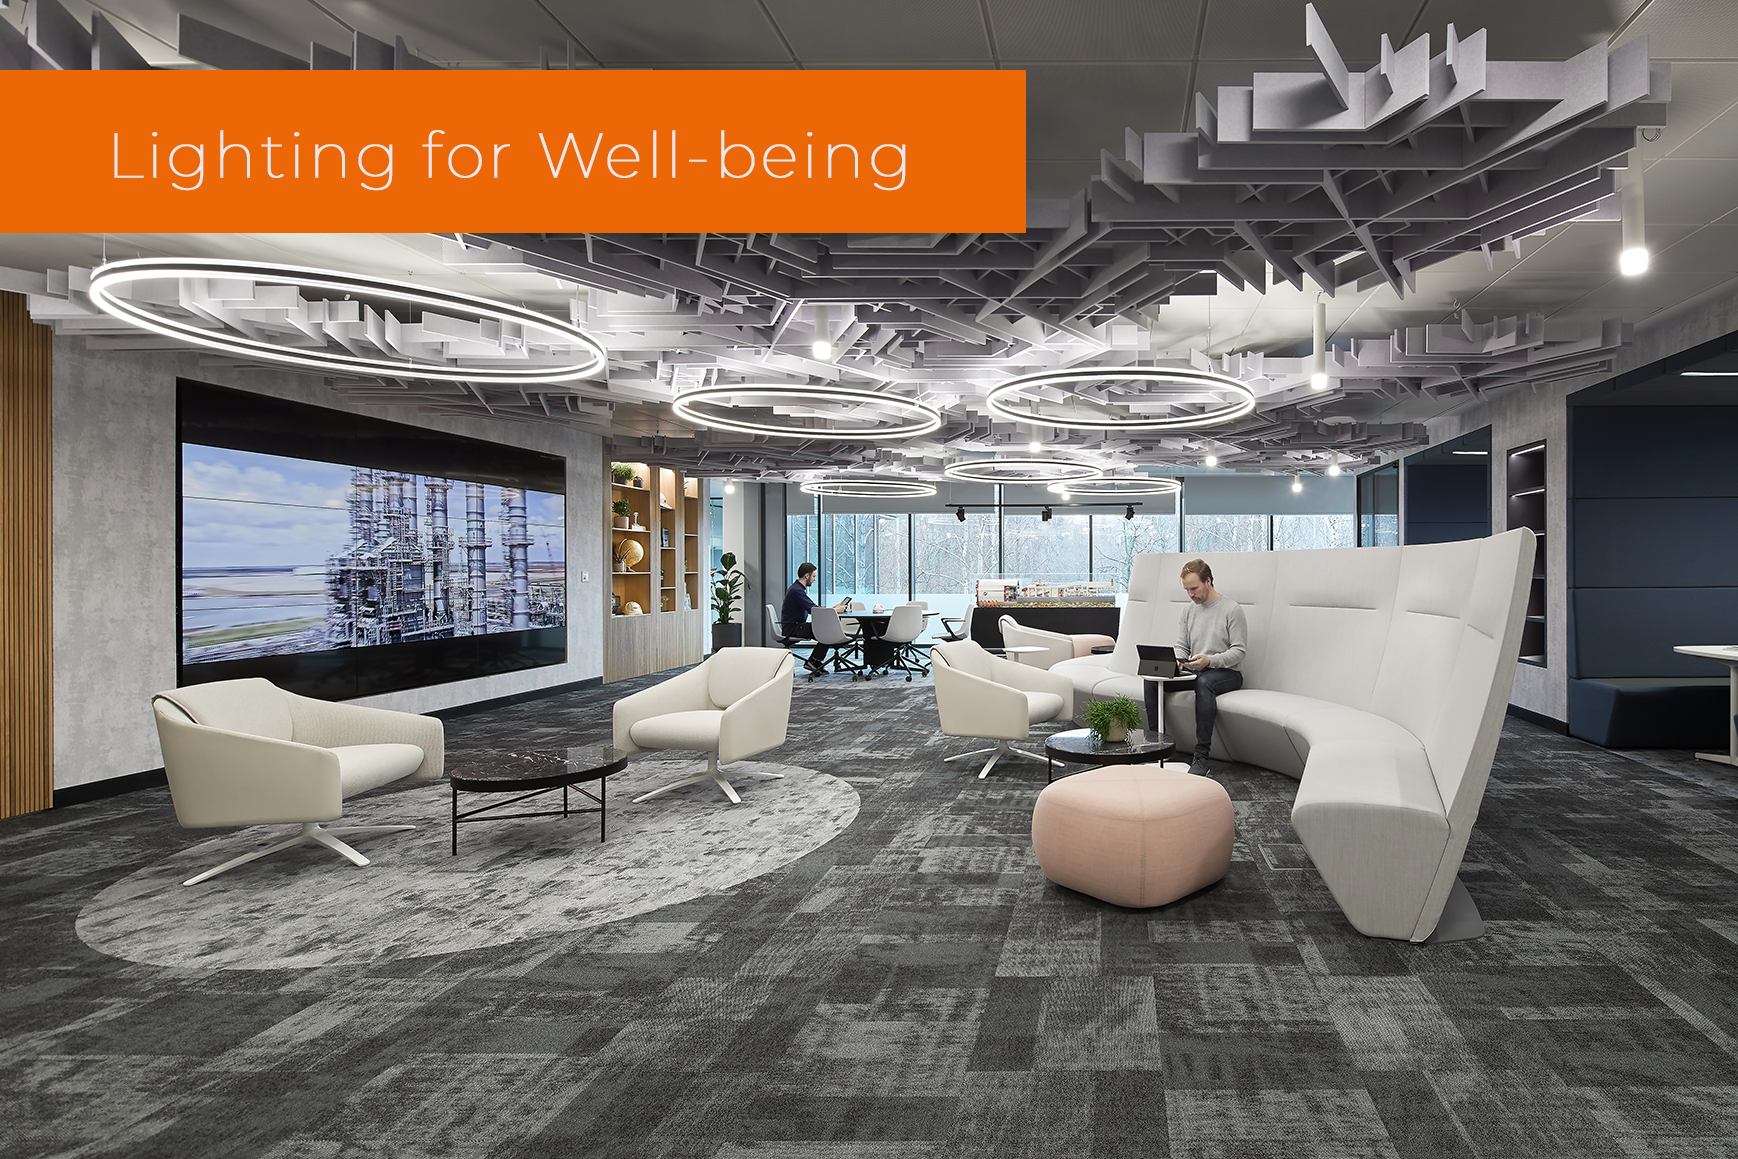 Lighting for Wellbeing